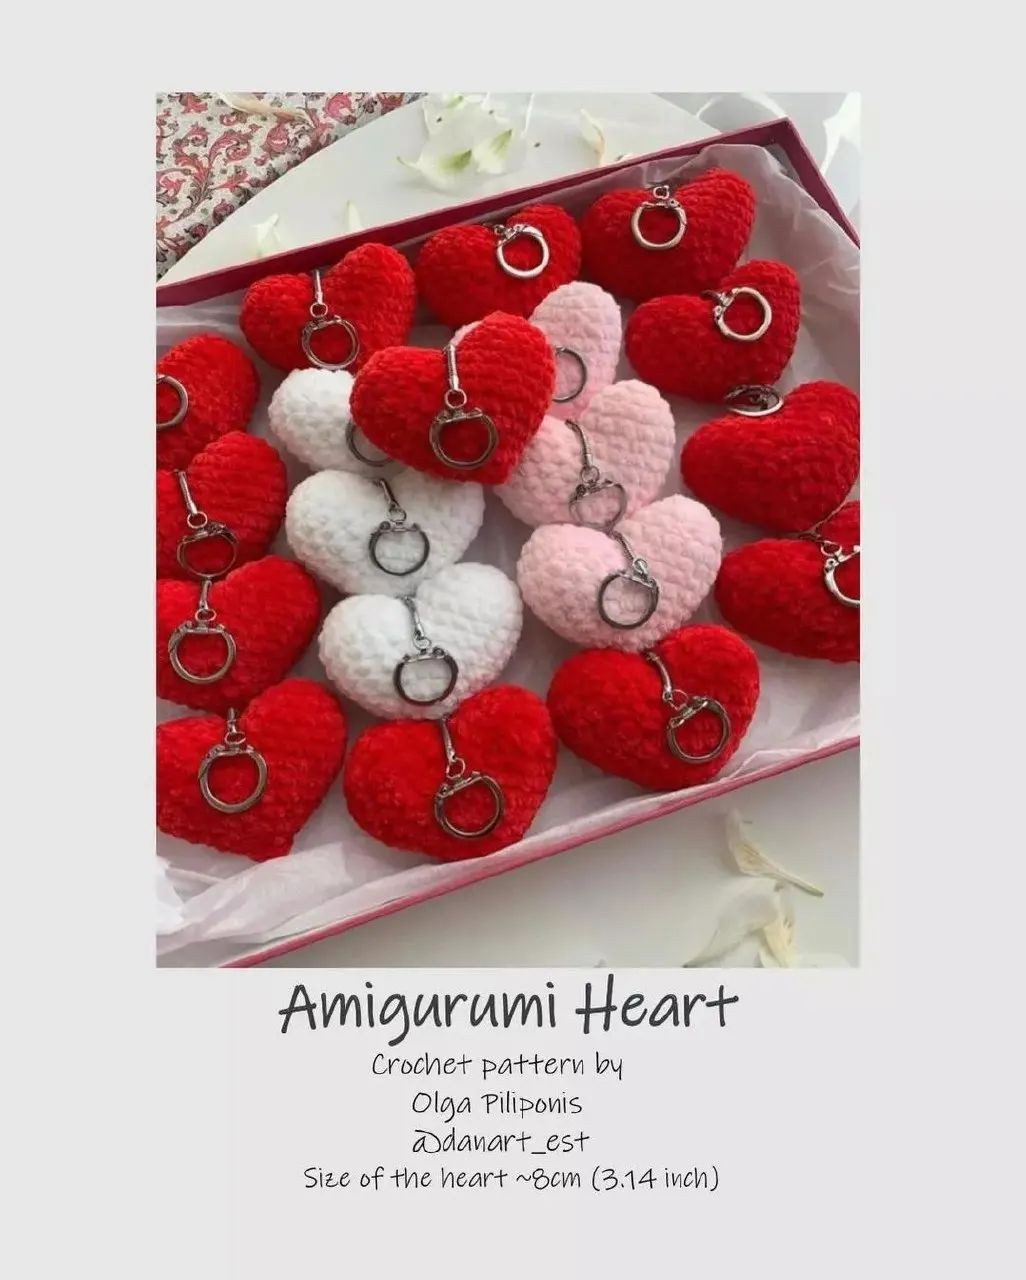 Heart-shaped keychain, white, red.